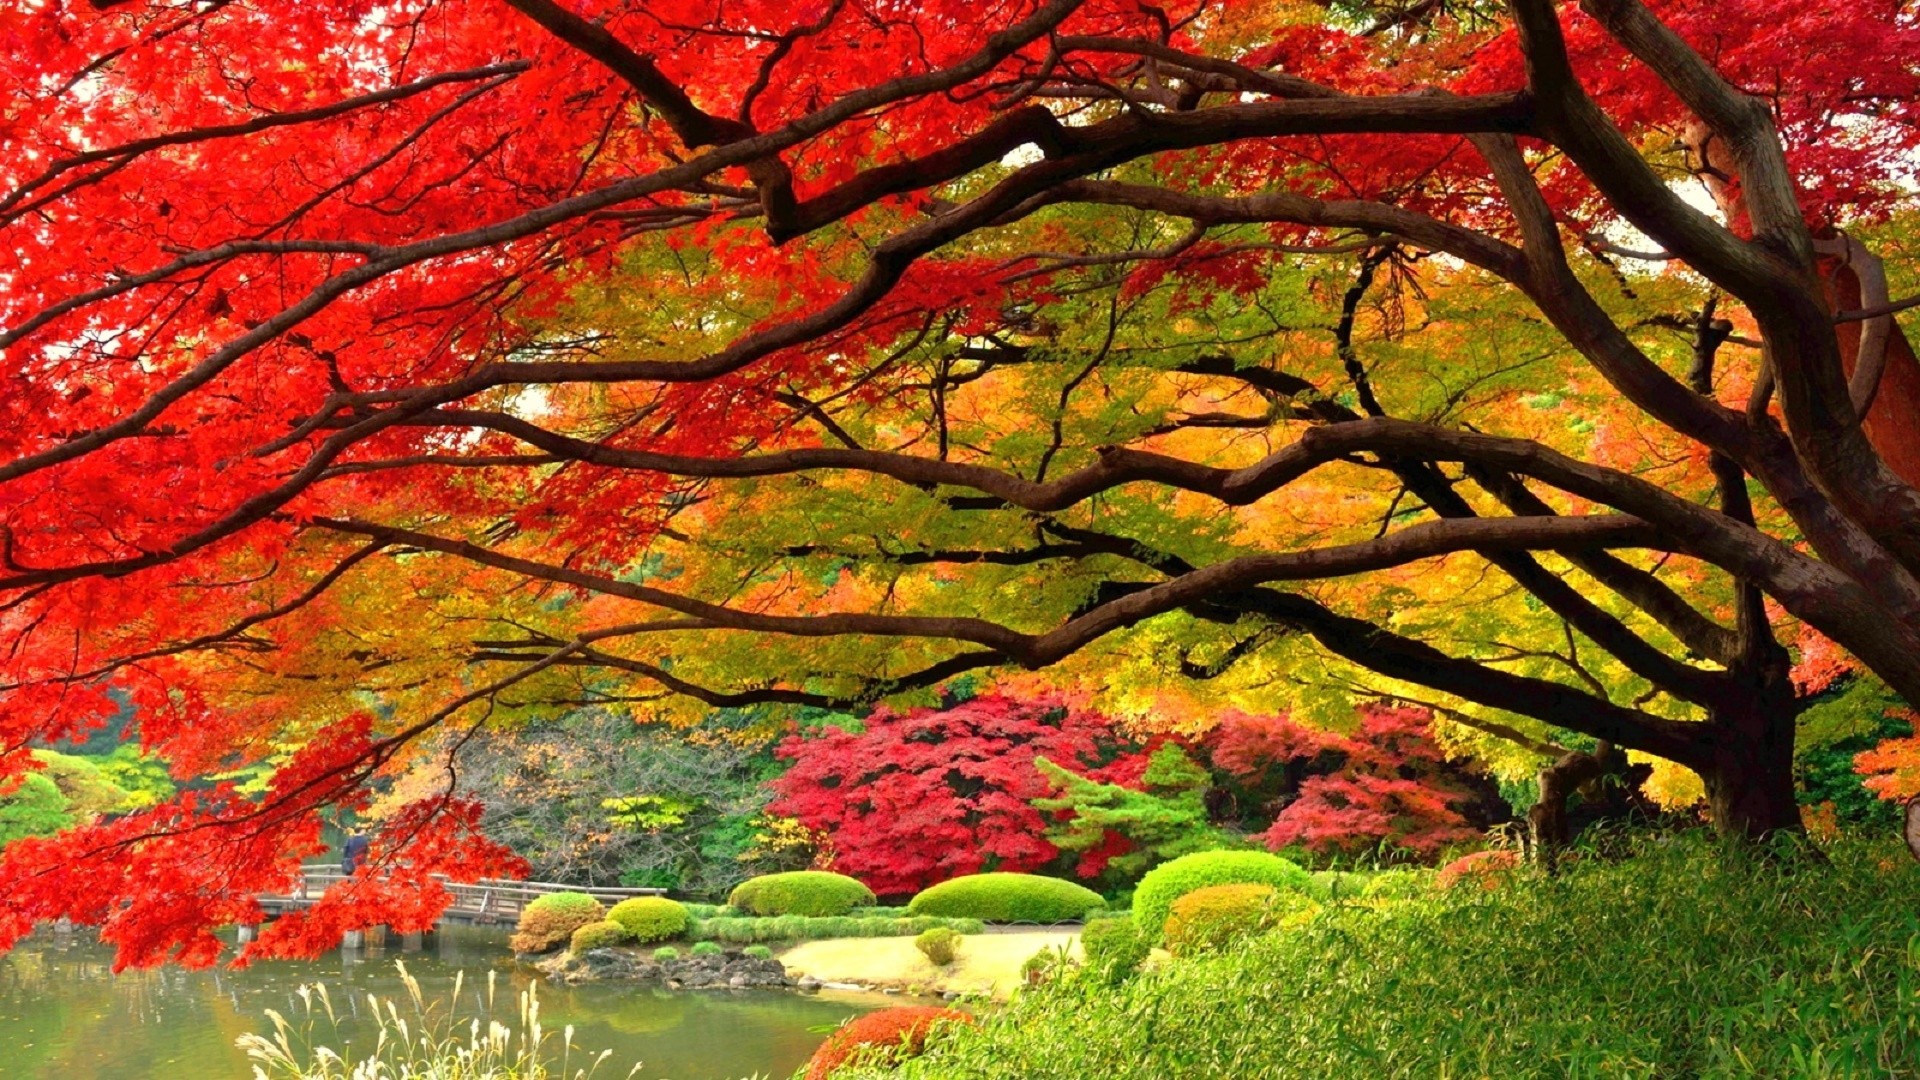 #DD4422 Color – Nature Leaves Photography Japan Attractions Japanese Stunning Fall Colors Dreams Pre Beautiful